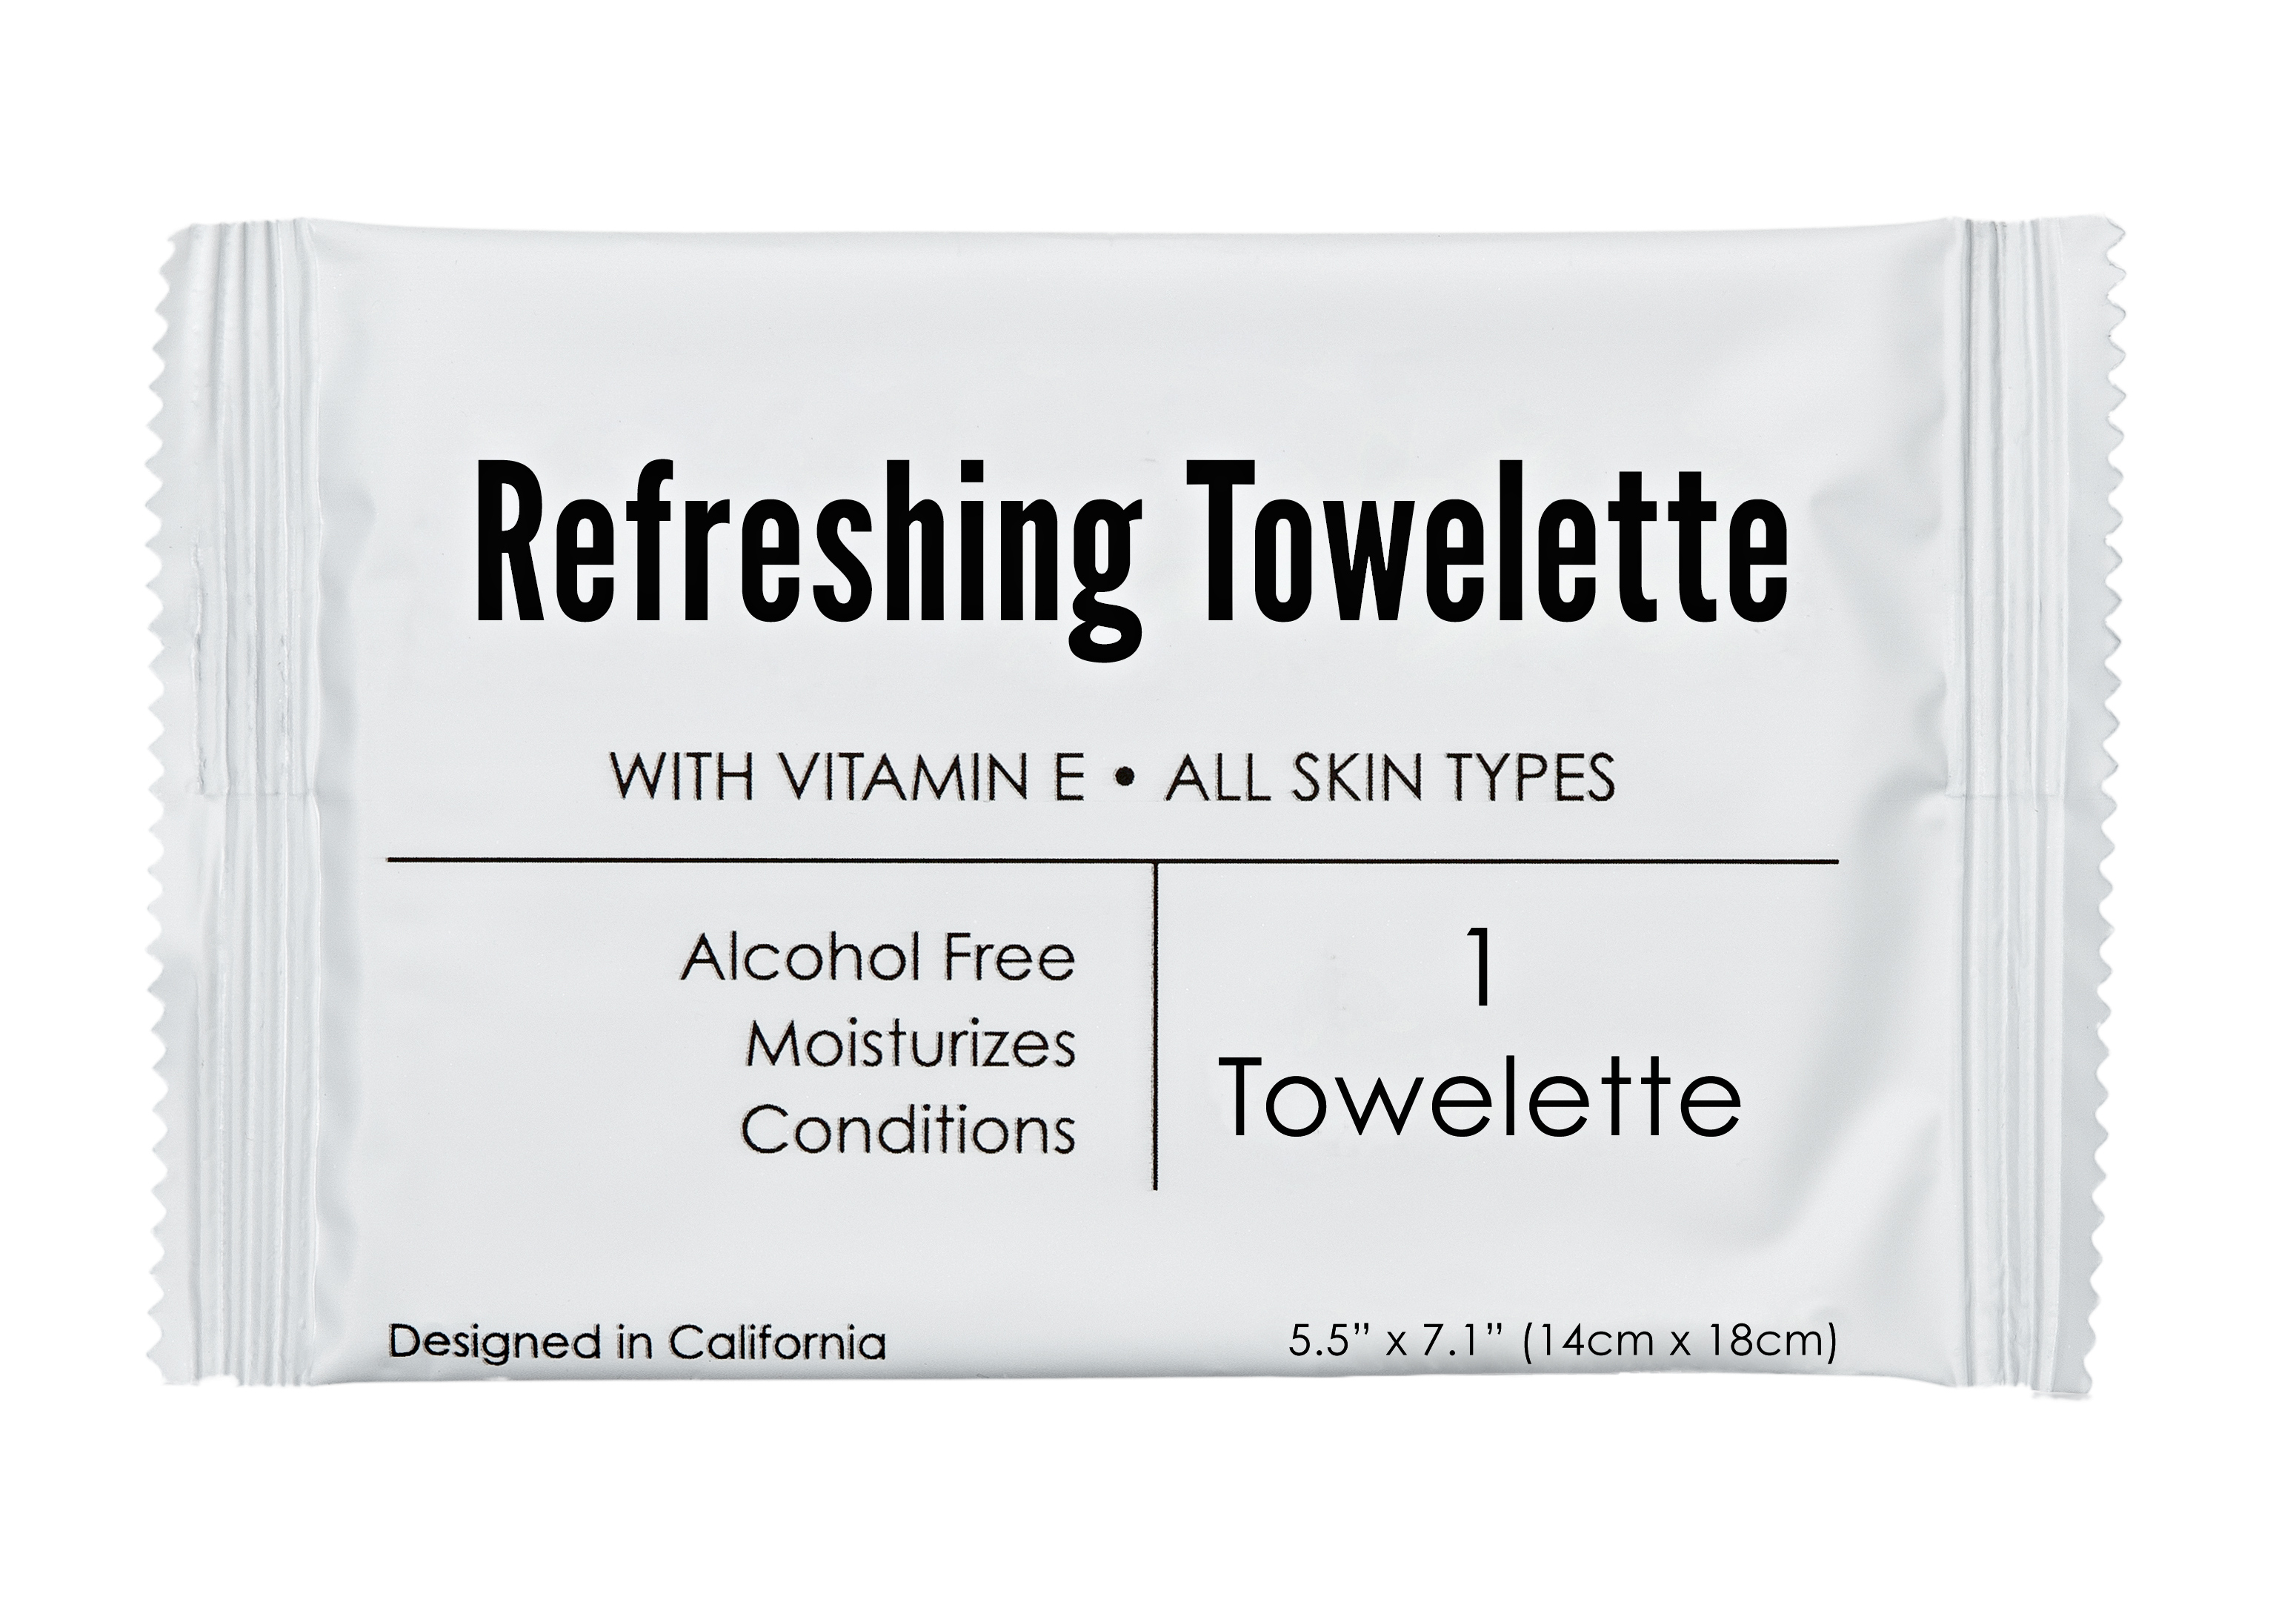 Refreshing Towelettes were also launched in 2020 to address the pandemic.